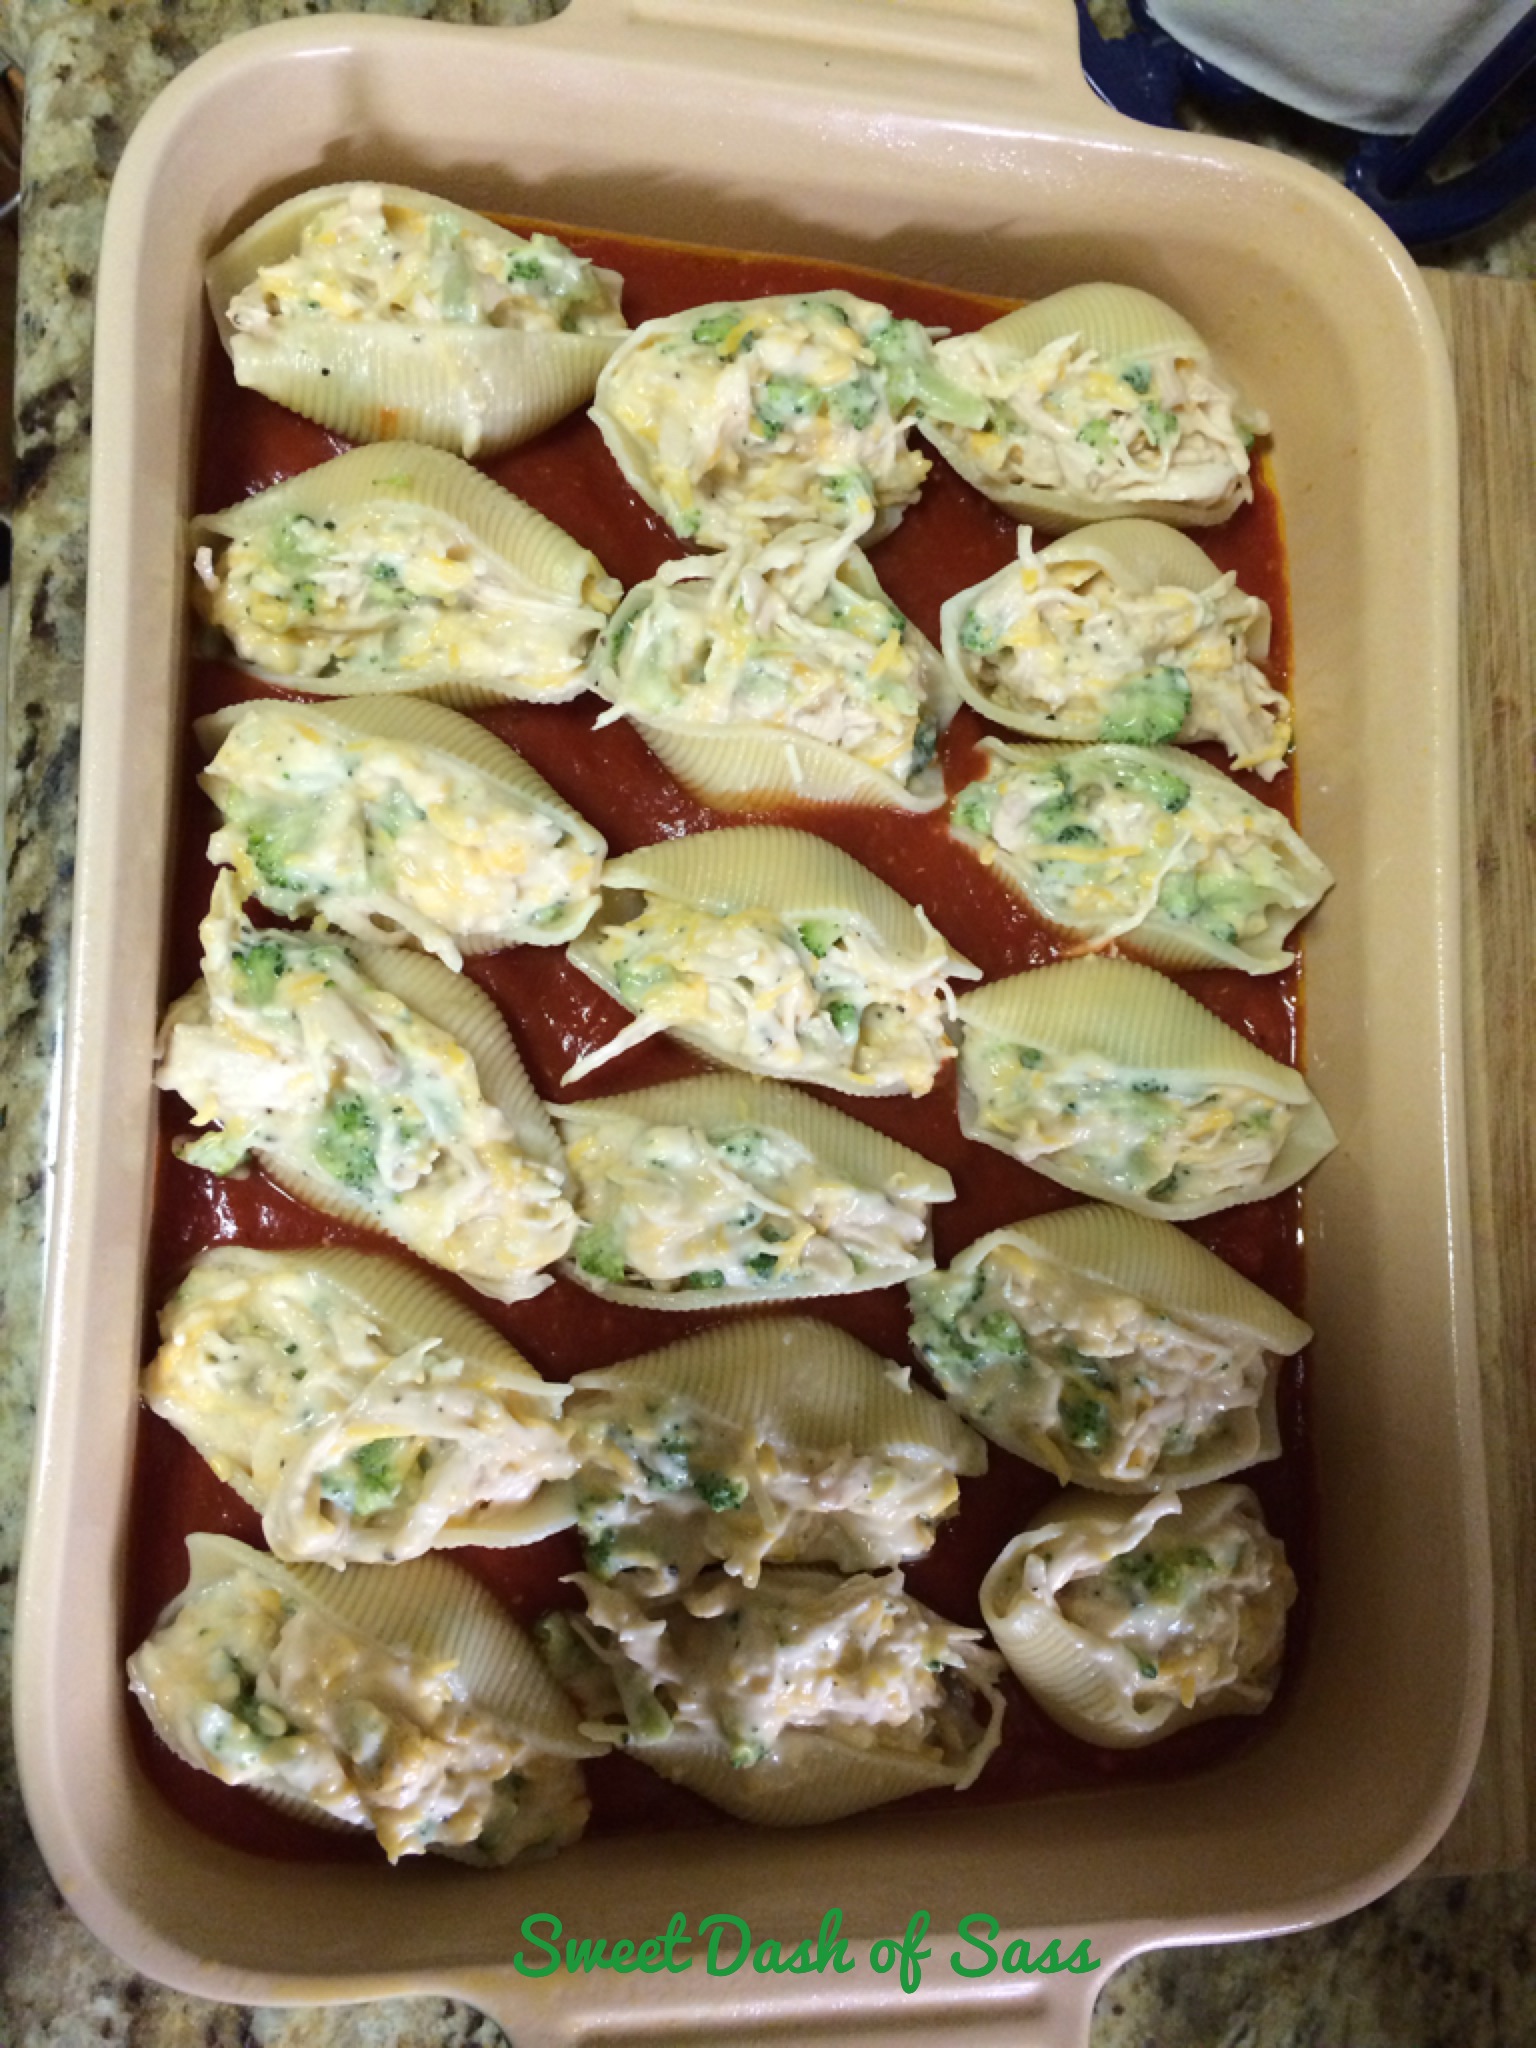 Chicken Brocolli Alfredo Stuffed Shells - www.sweetdashofsass.com - Check out and 'LIKE' Sweet Dash of Sass on Facebook for this recipe and many more!